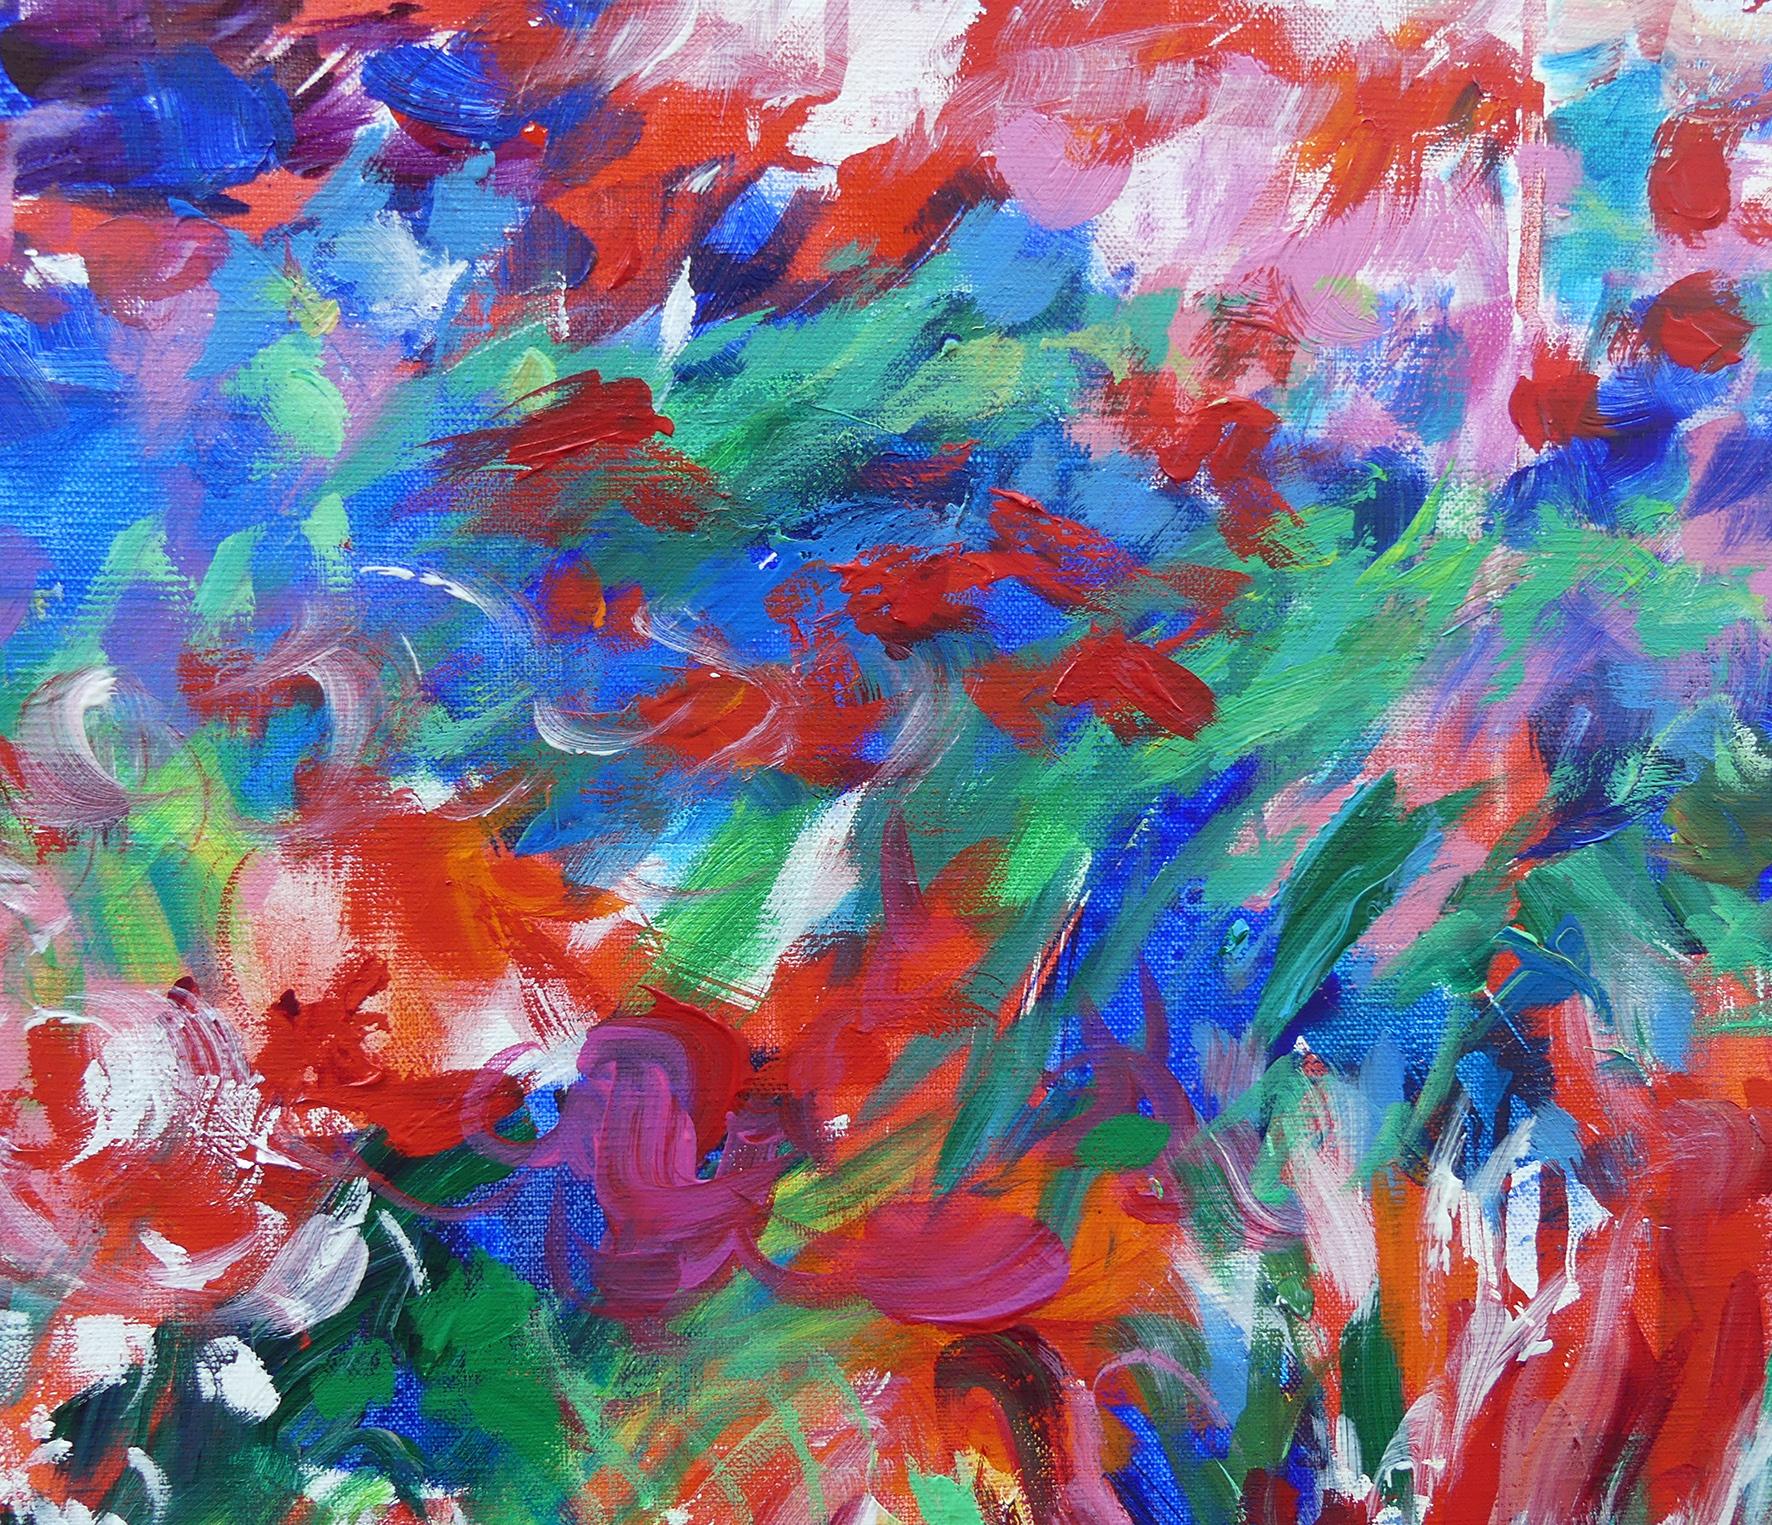 Blue abstract field is a diptych representing a field of poppies and wild flowers gently blowing in the wind a source of great pleasure and inspiration . Mary Chaplin painted this beautiful scene in her own way between abstraction and impressionism.